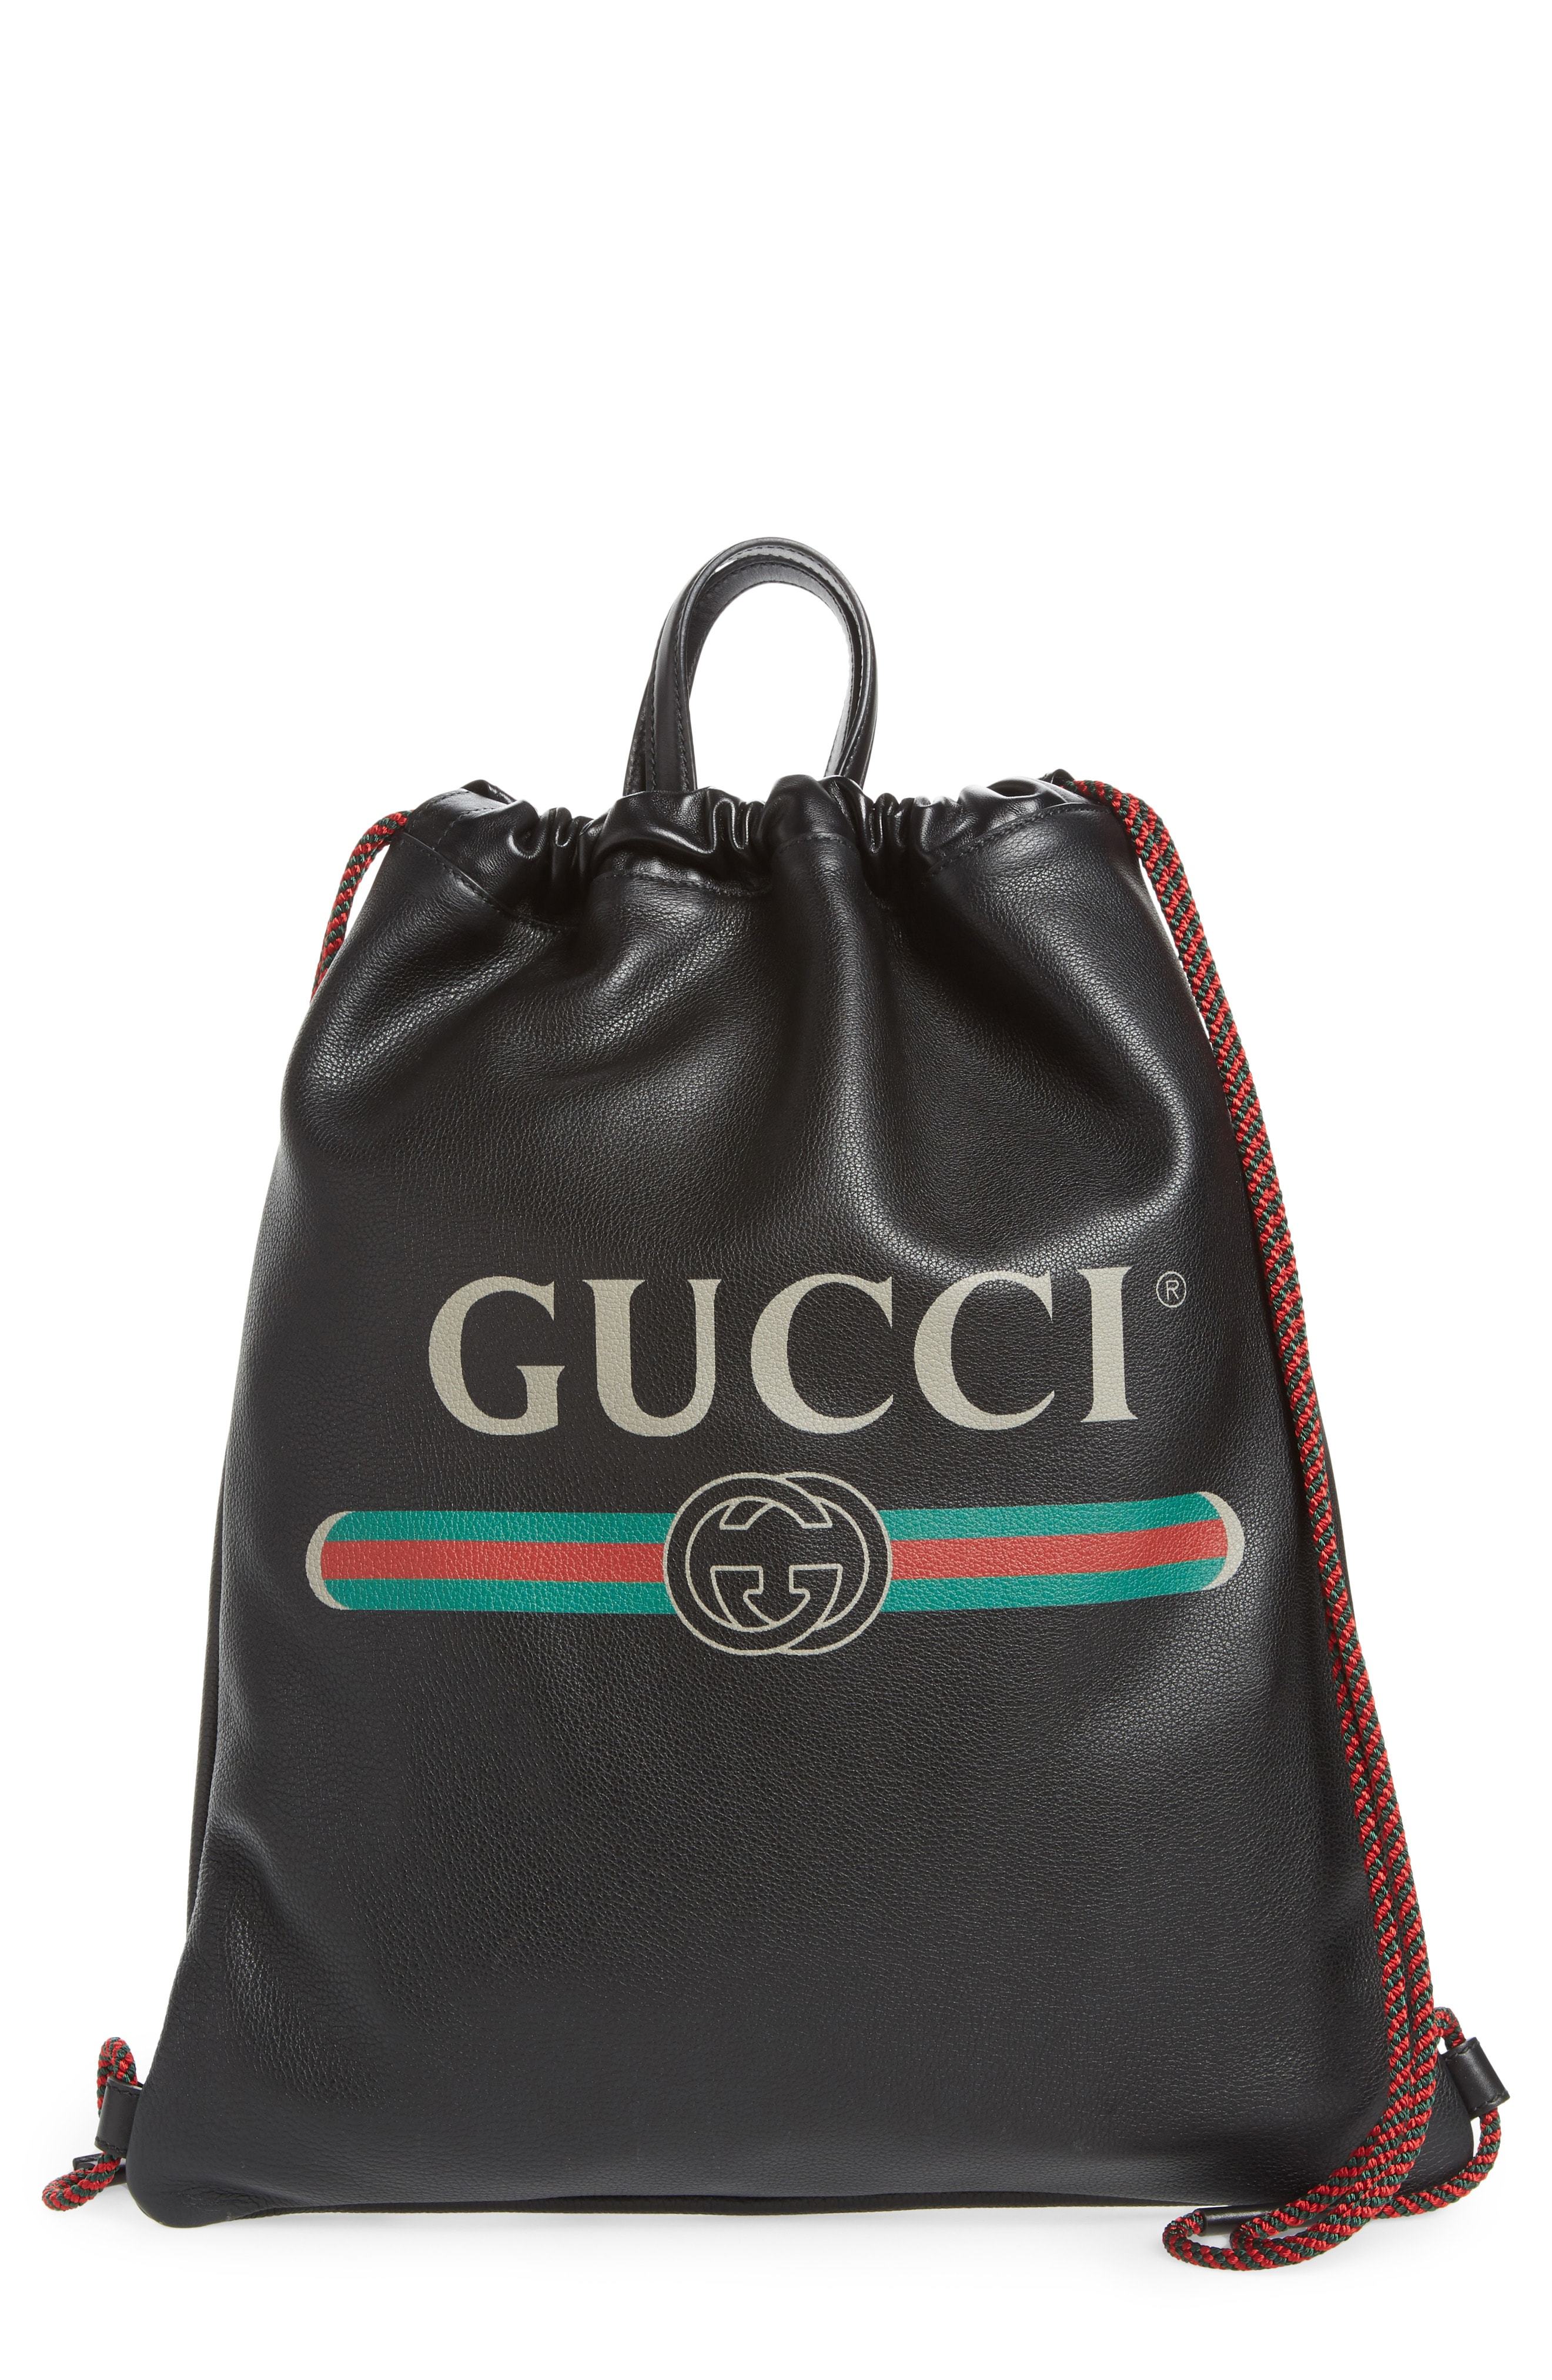 does nordstrom carry gucci